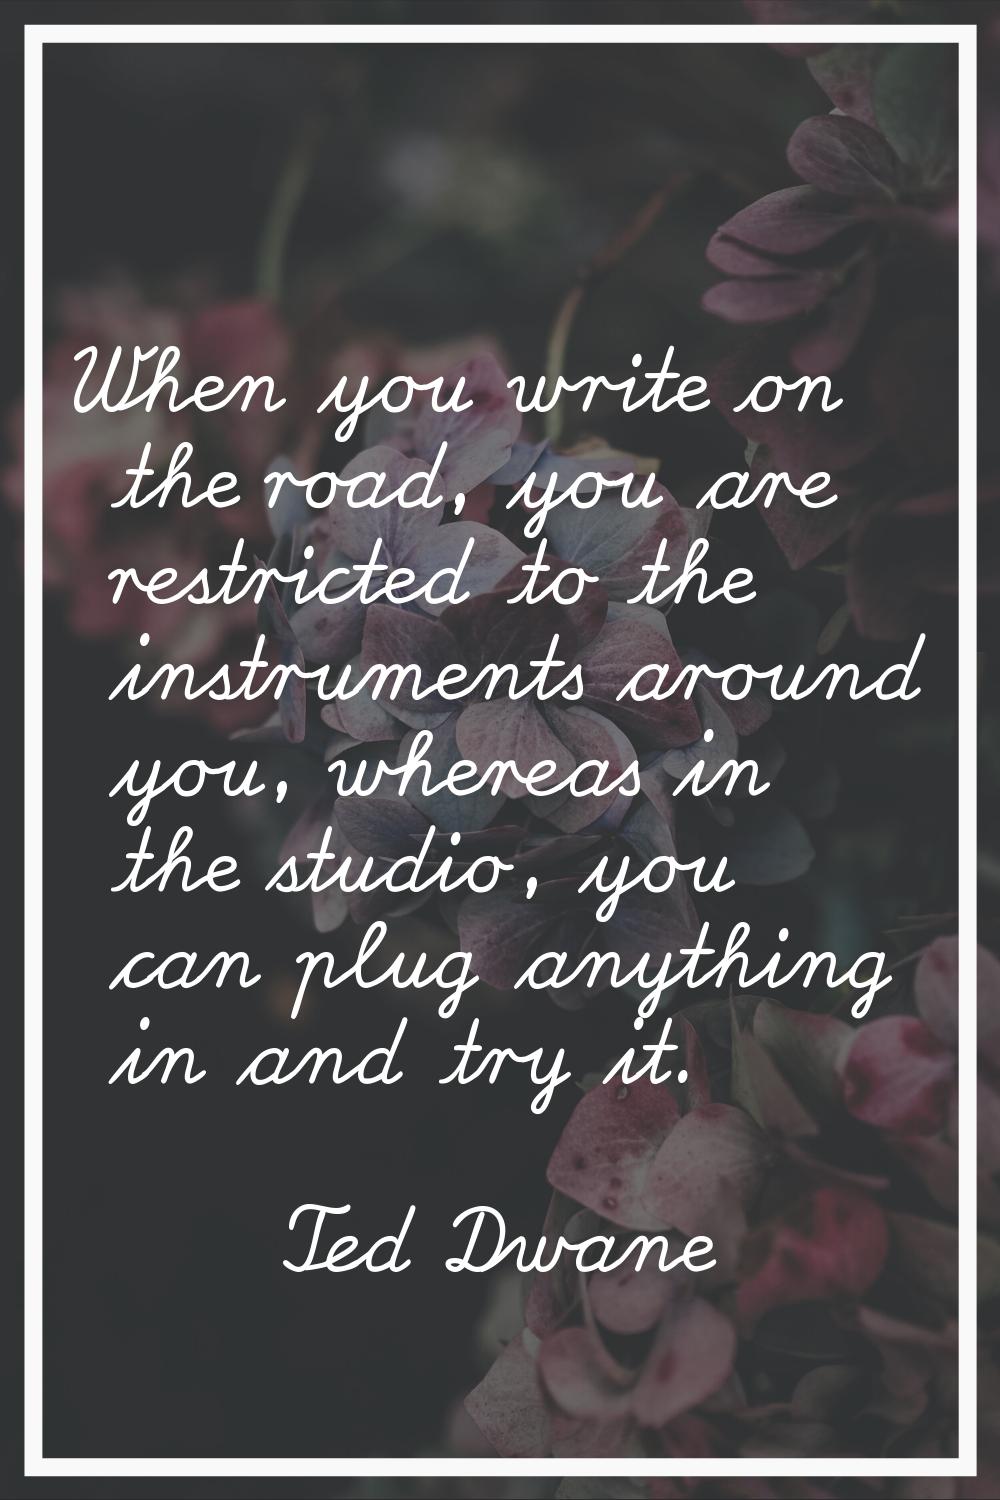 When you write on the road, you are restricted to the instruments around you, whereas in the studio